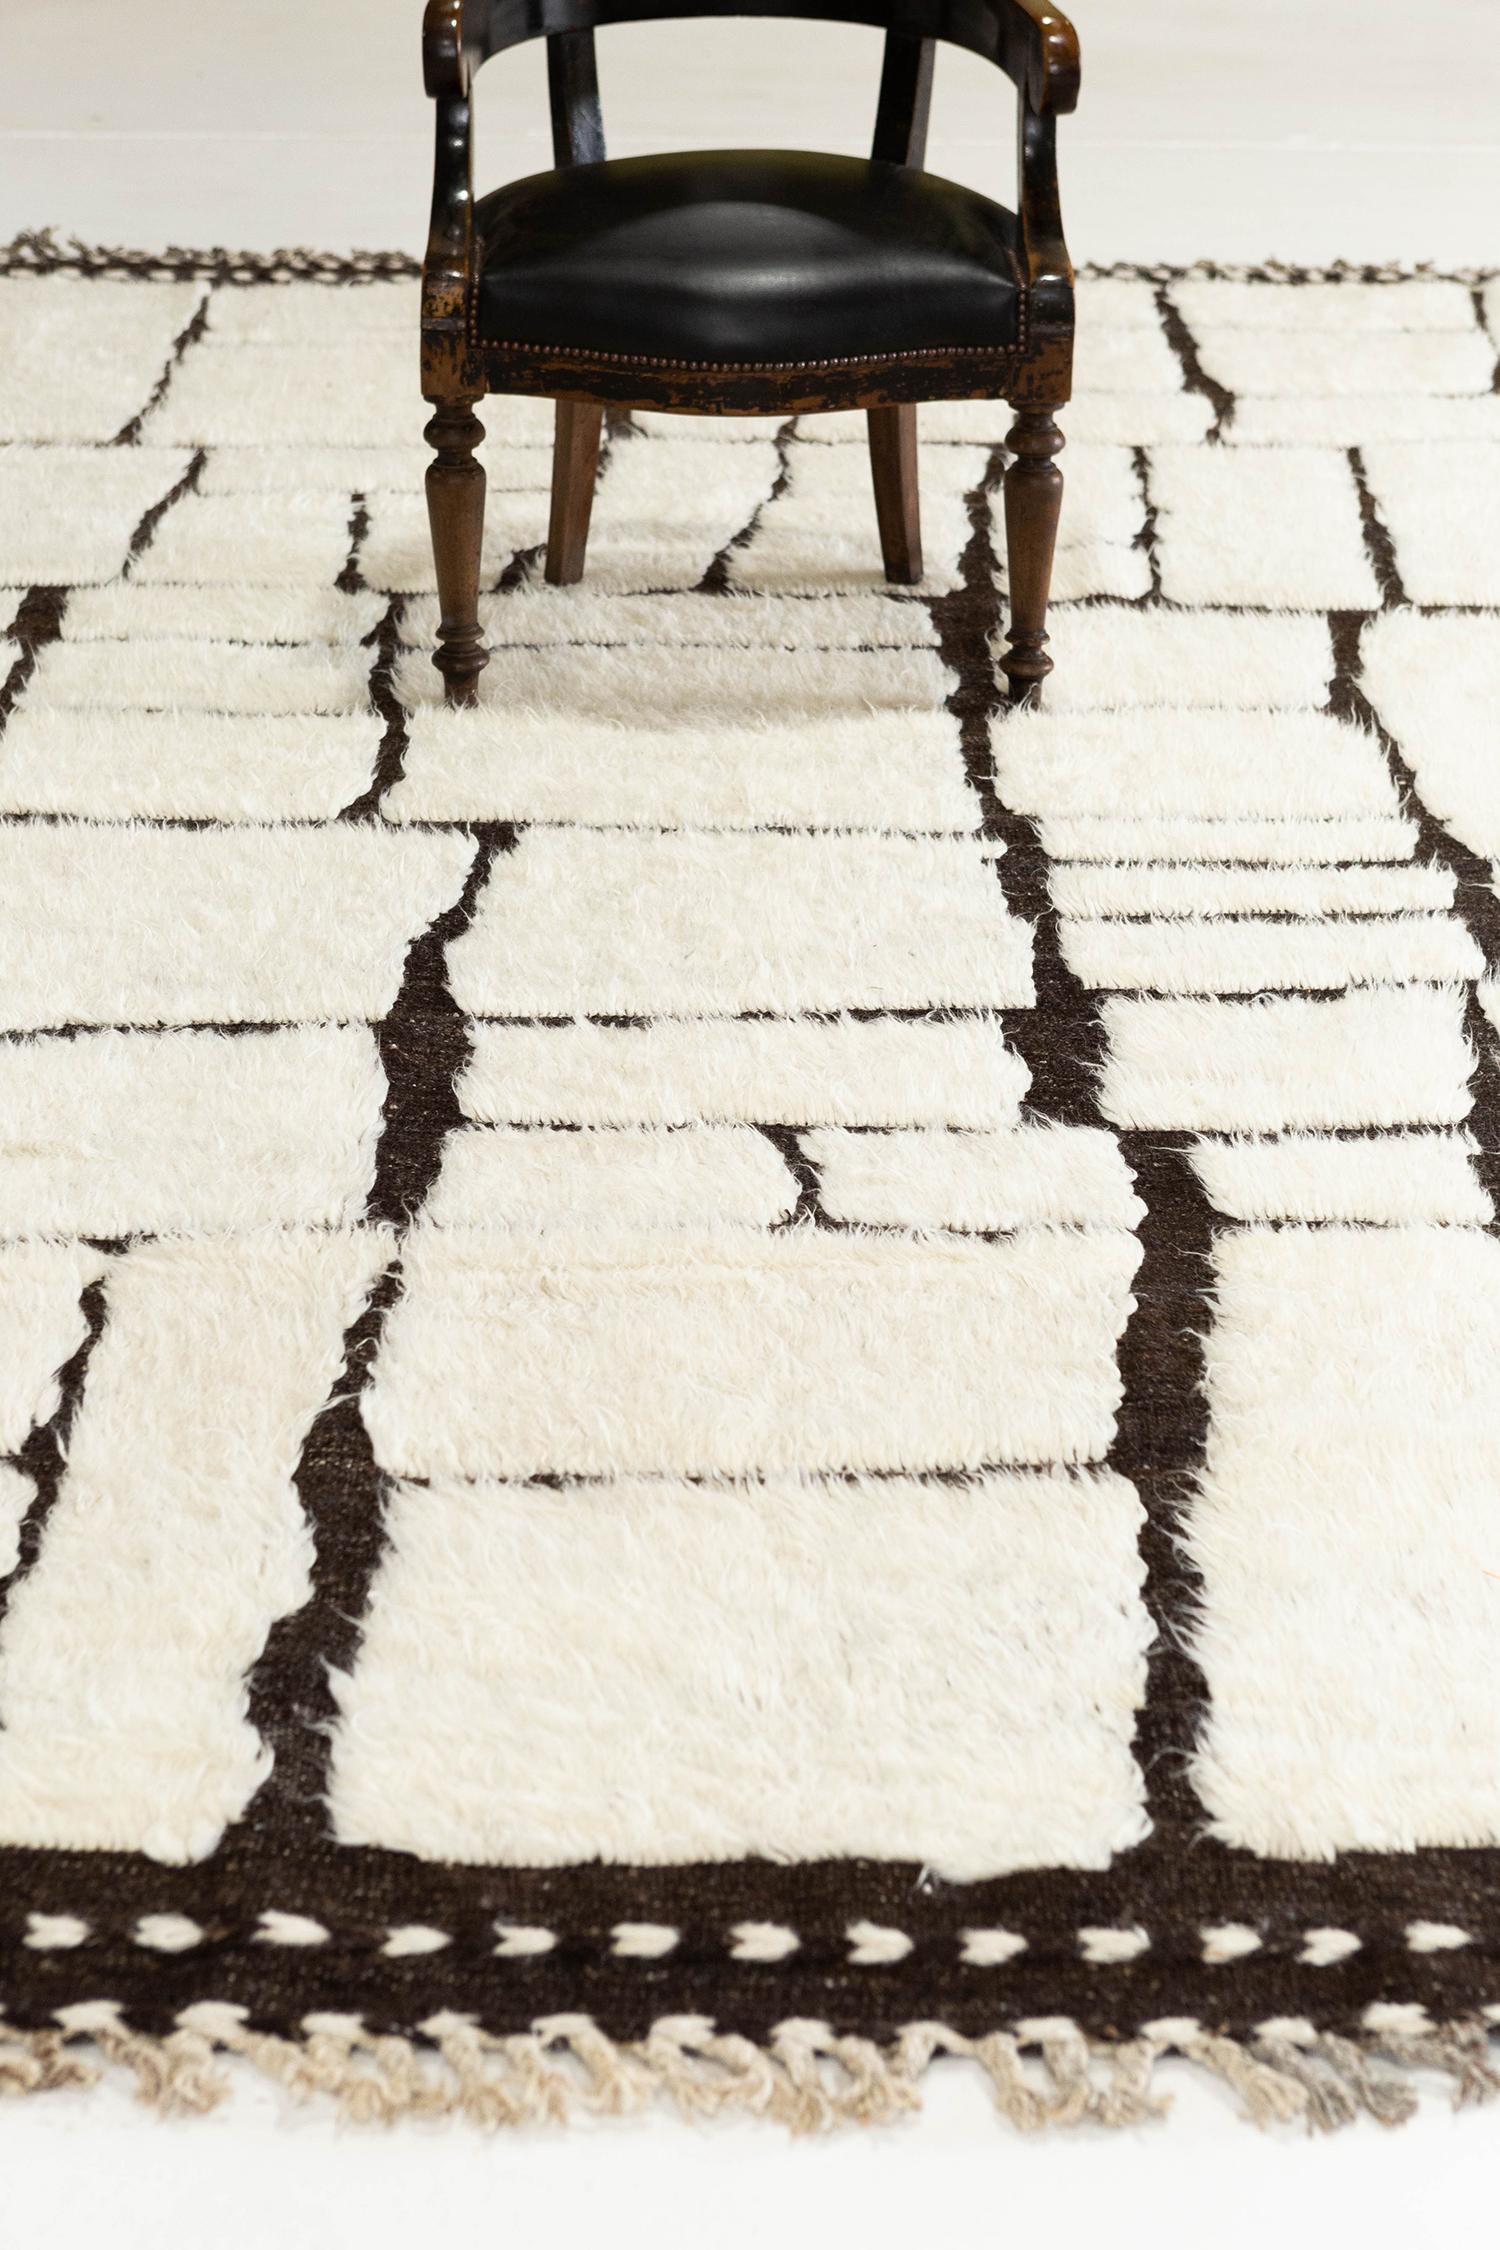 Maziere' is a handwoven wool piece with unique design elements that mirror roman masonry. This luxurious black pile weave and white shag make for the perfect contemporary. Maziere is designed in Los Angeles for the modern design world.